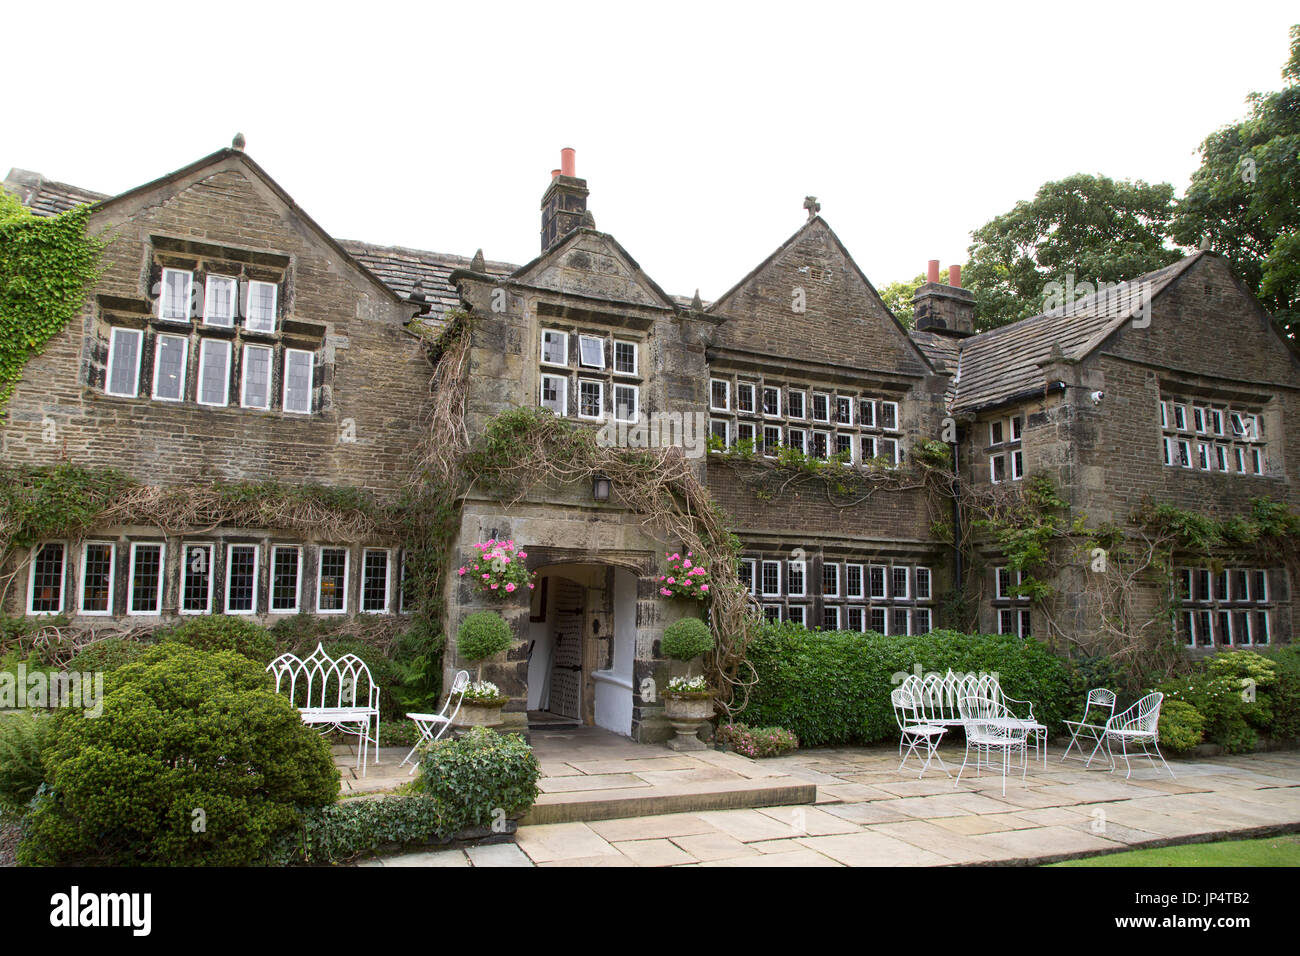 Facade of the Holdsworth House hotel and restaurant in Halifax, England. The Jacobean Manor holds a four star hotel. Stock Photo